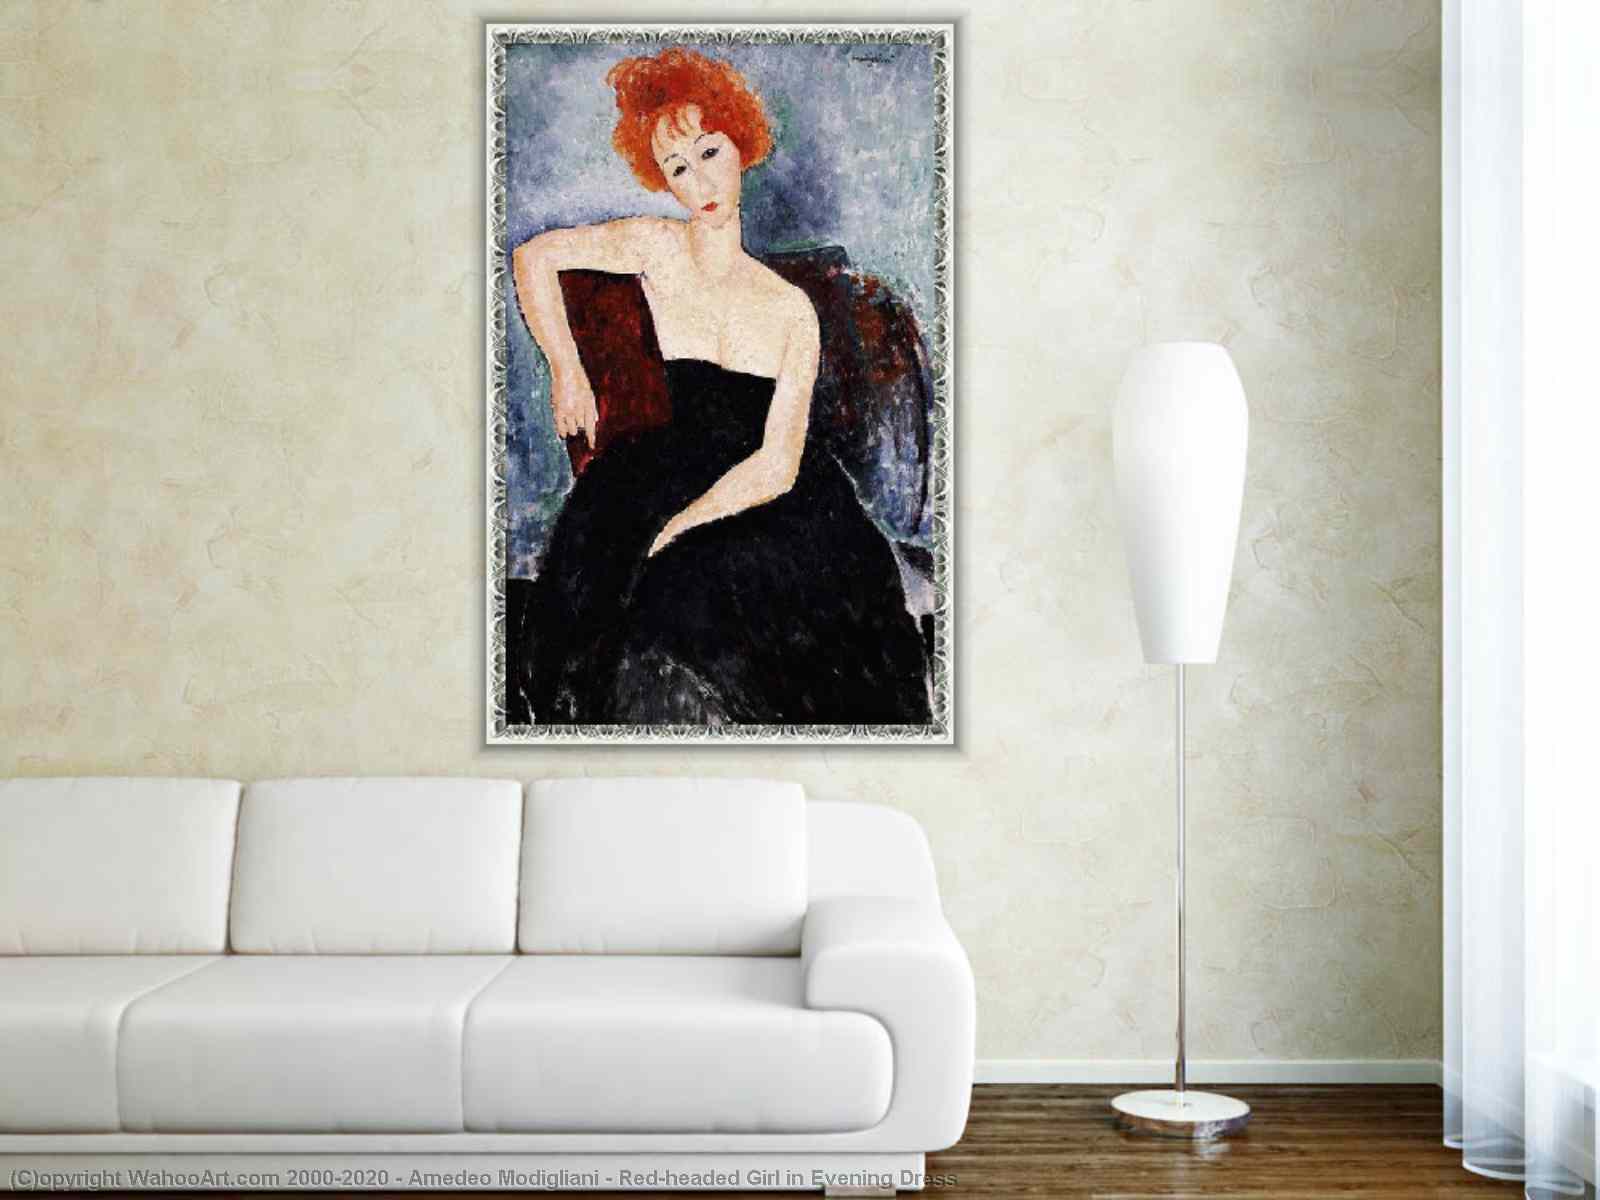 Amedeo Modigliani Redheaded Girl in Evening Dress Giclee Print Repro on Canvas